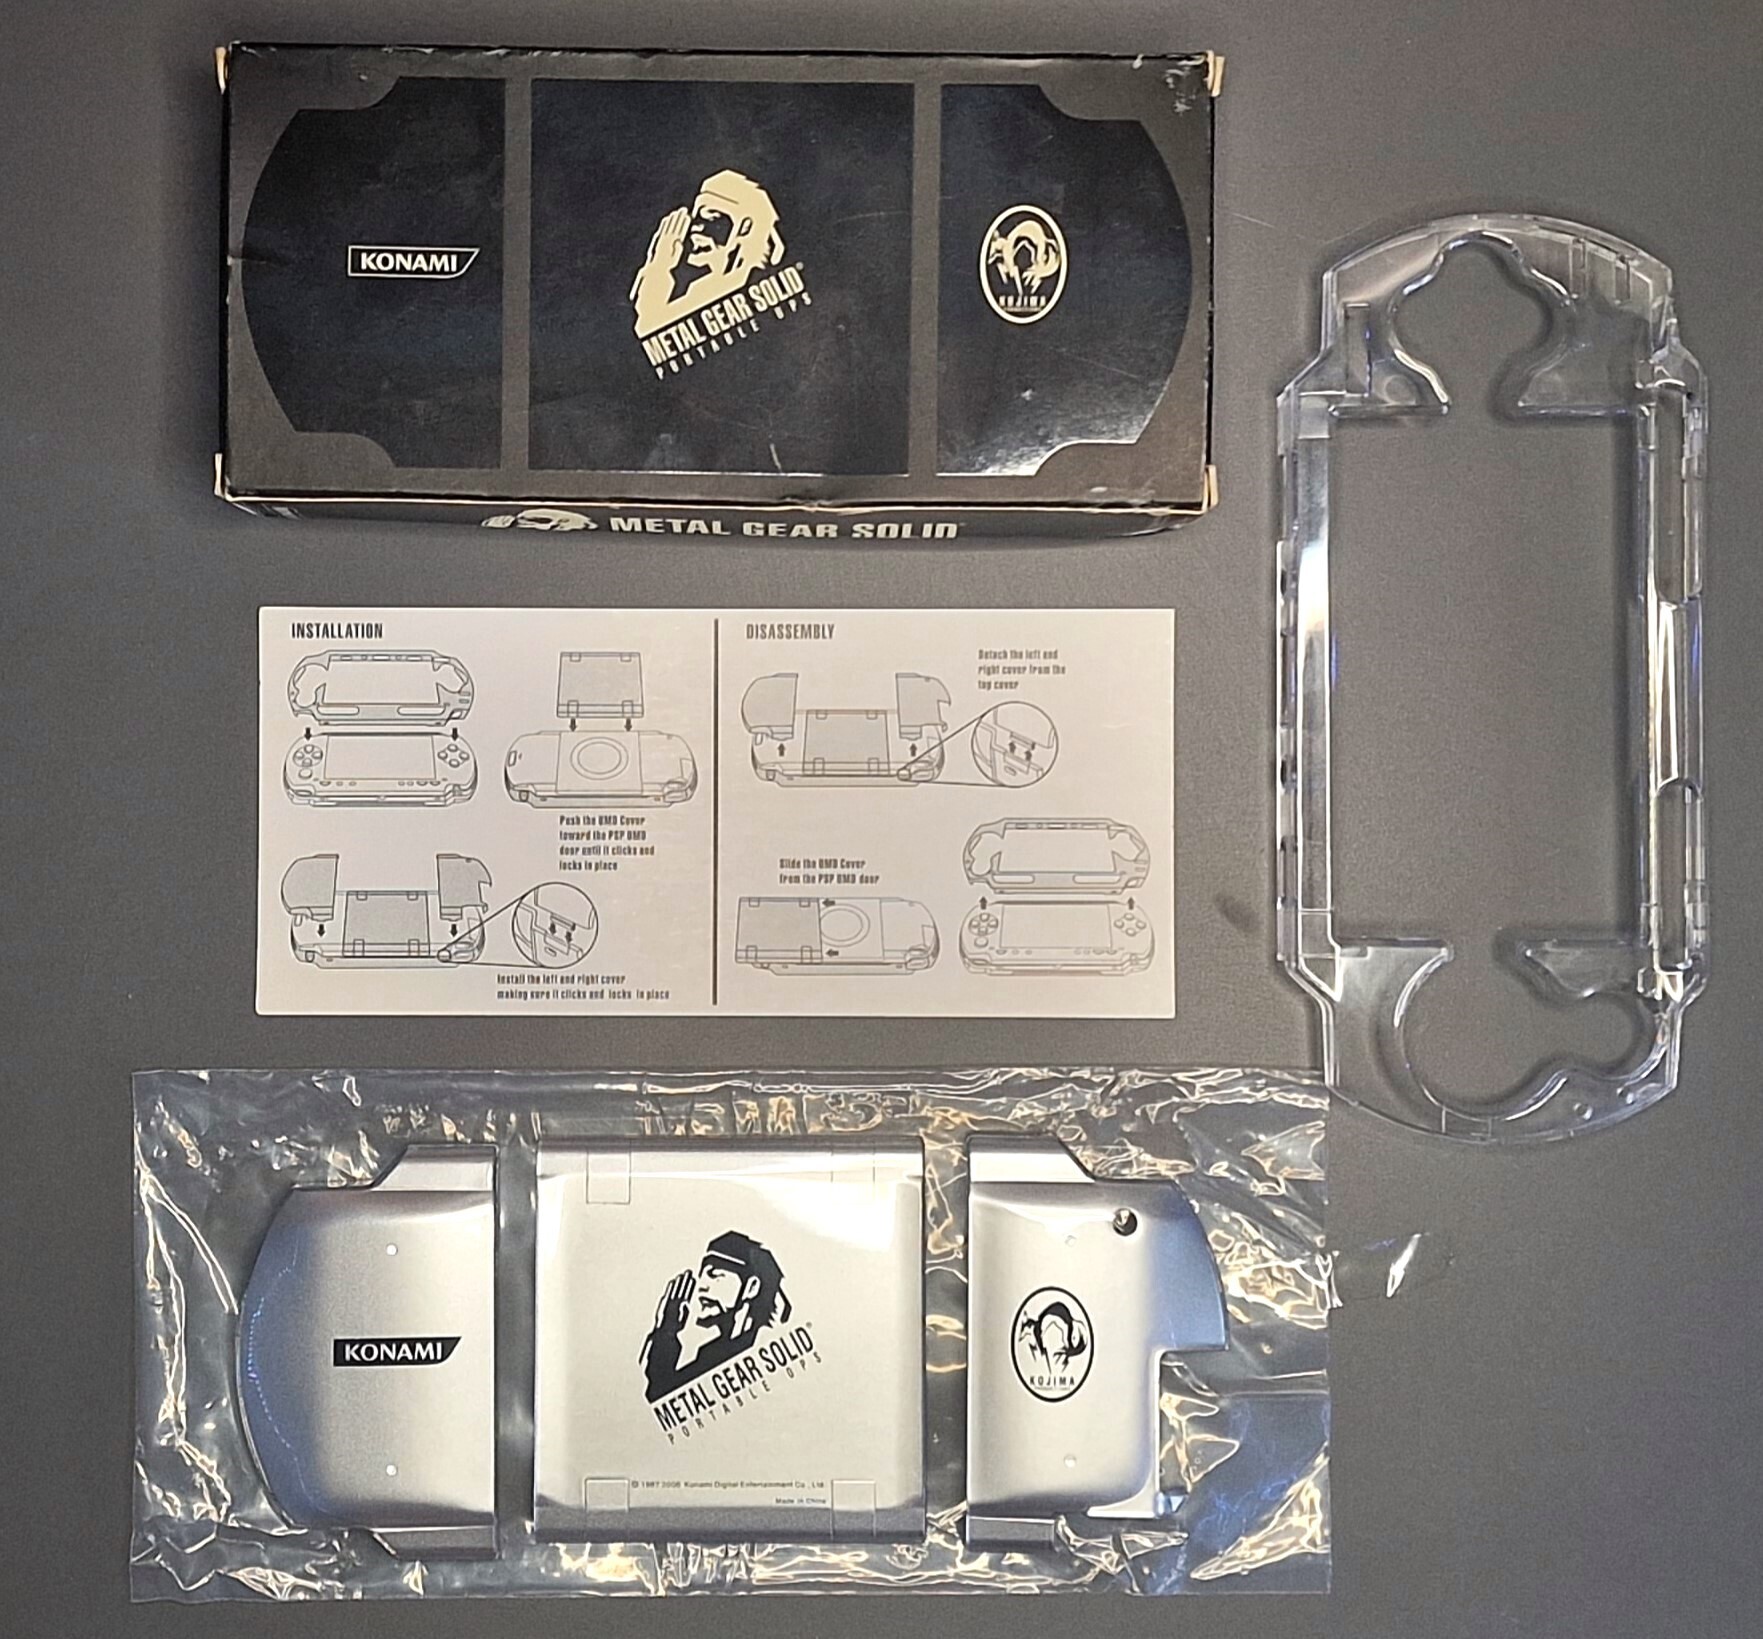  Sony PSP Metal Gear Solid  OPS Promotional Console Case